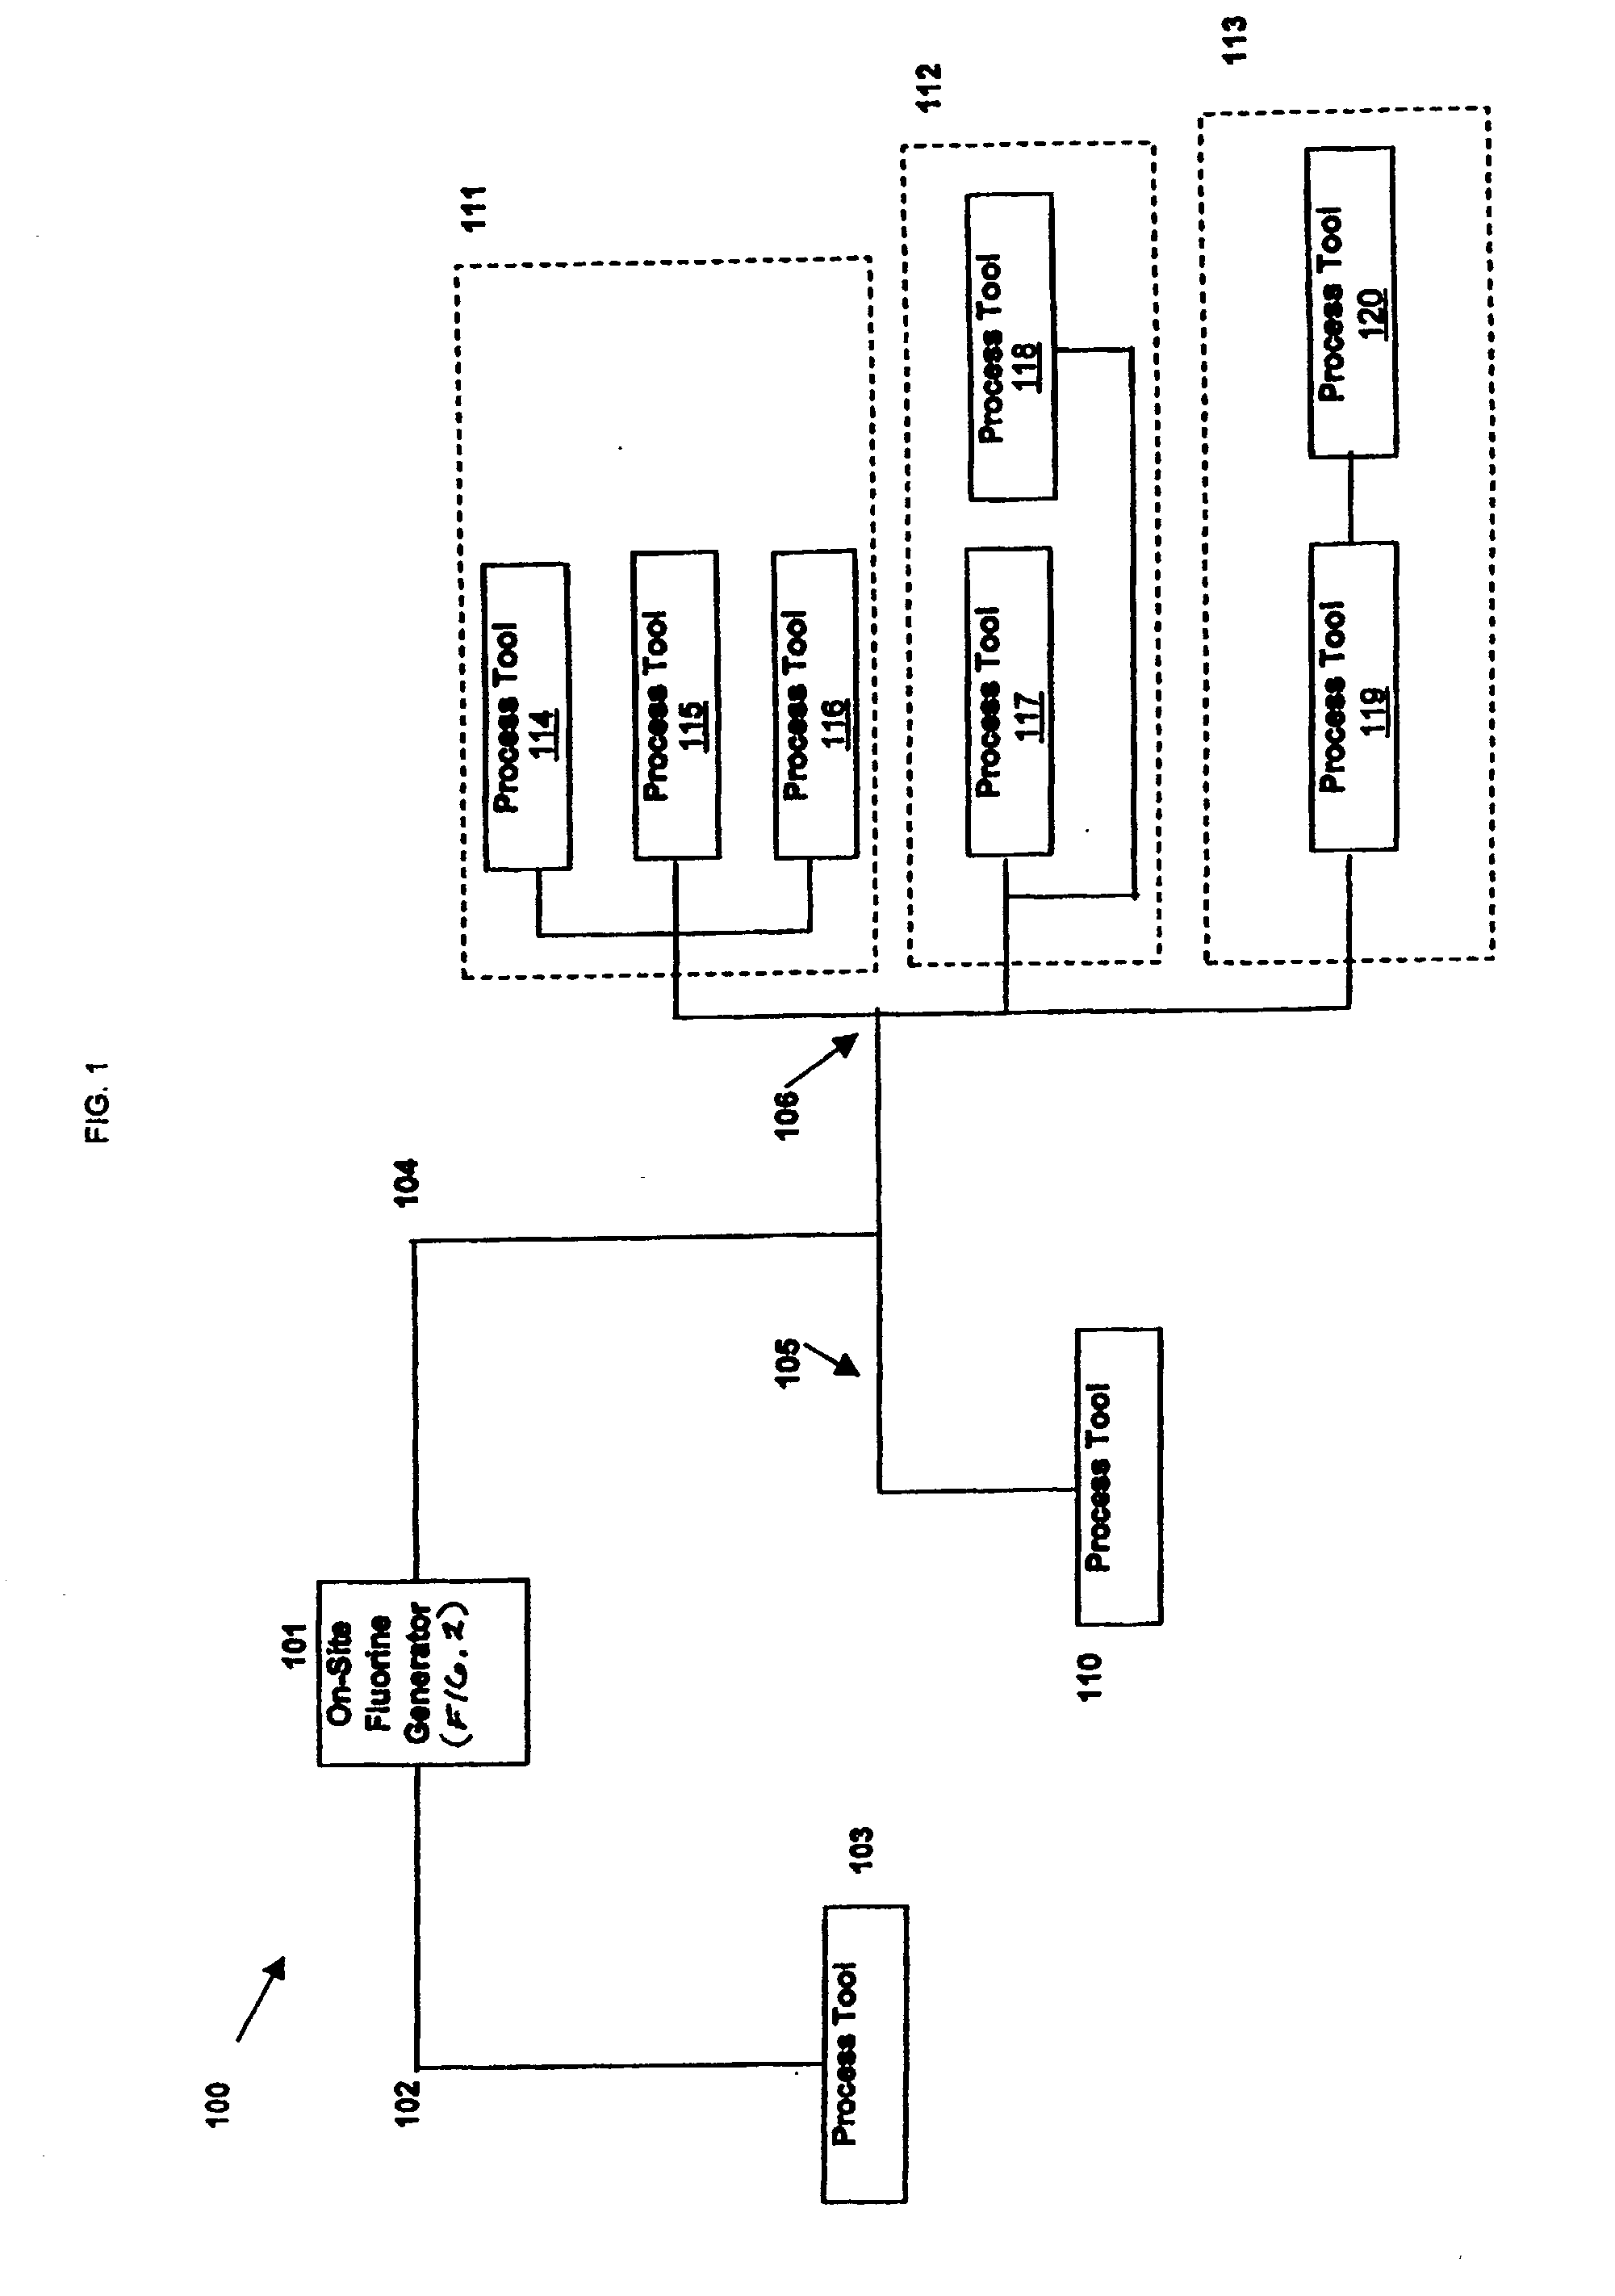 Generation and distribution of molecular fluorine within a fabrication facility